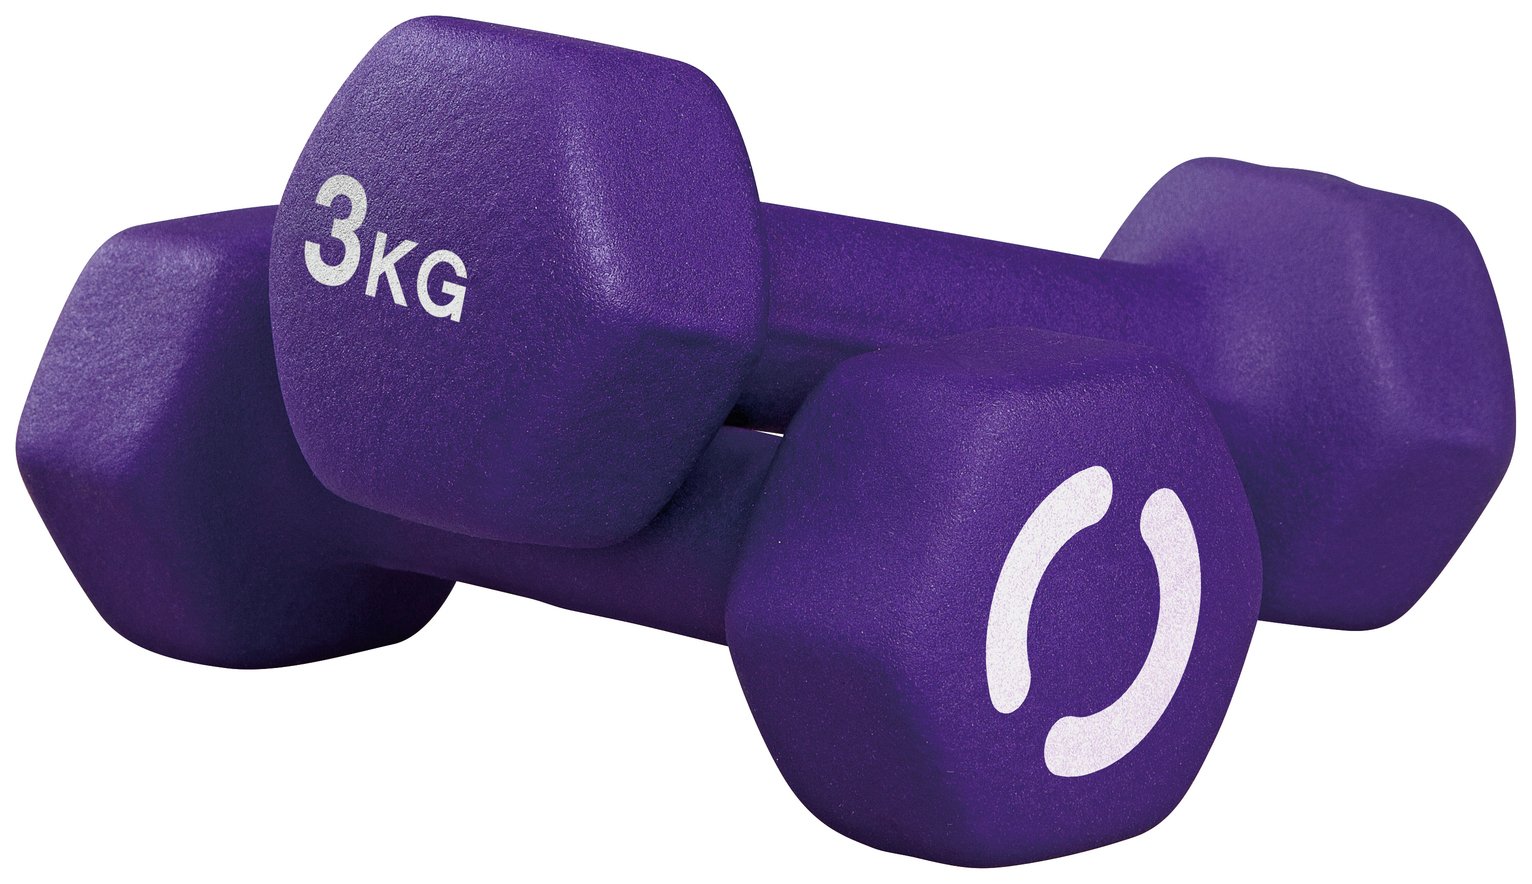 Opti 3kg Dumbell Pair FAST DELIVERY